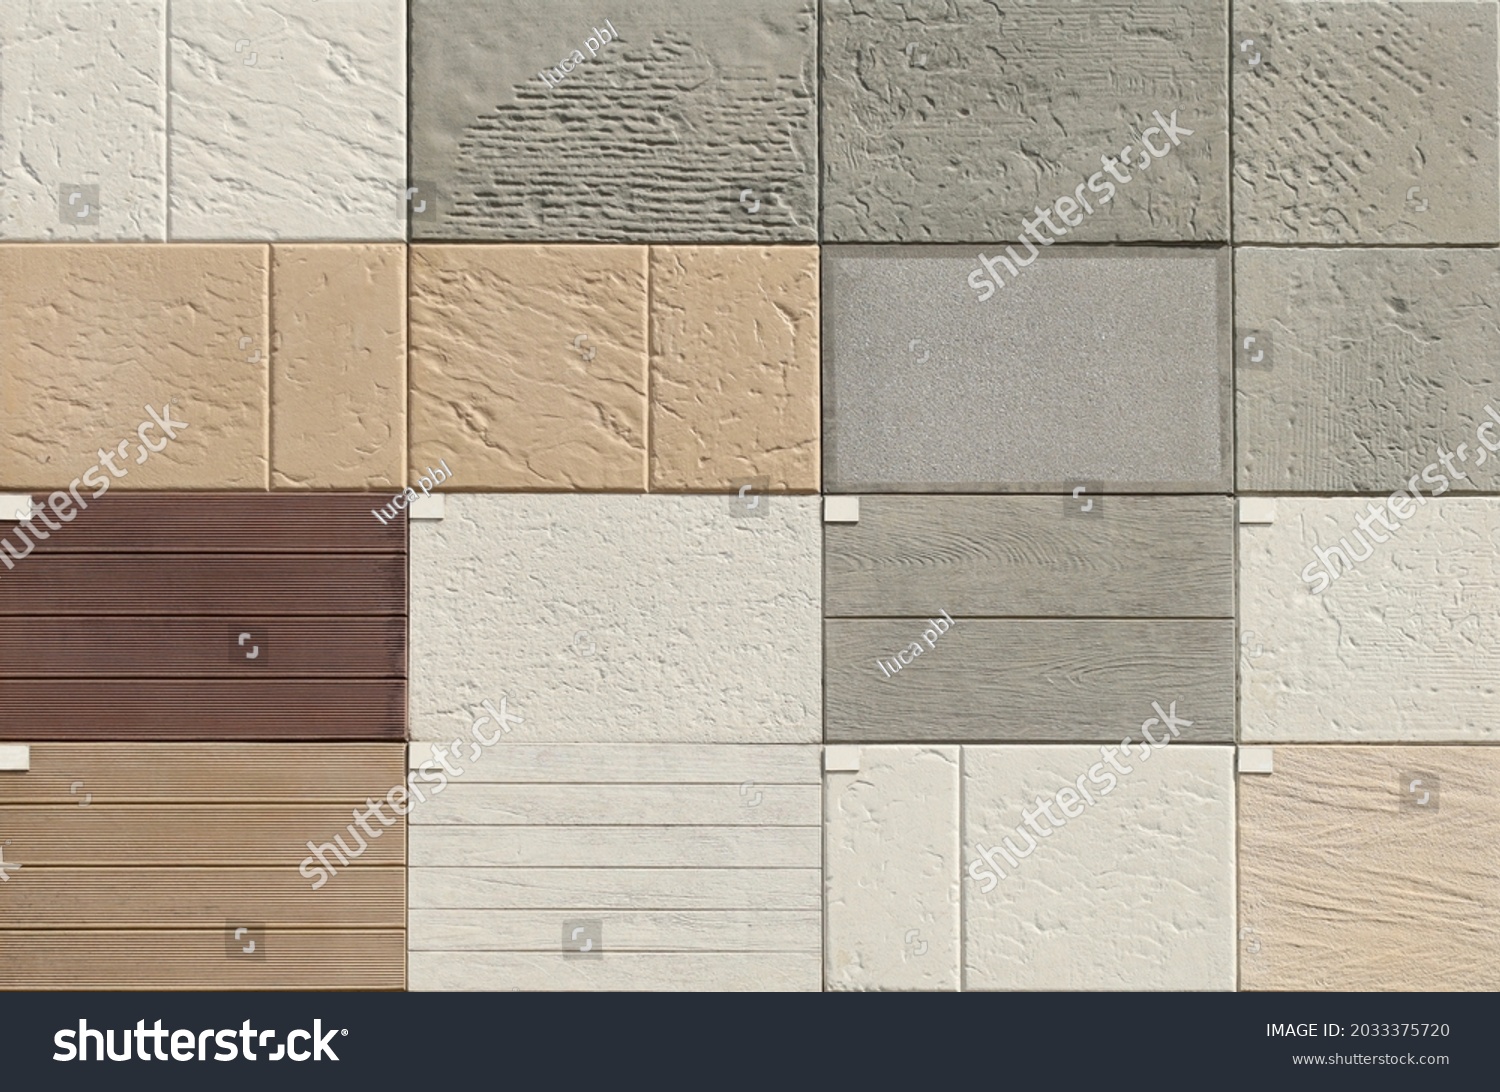 Samples of outdoor floor tiles of different colors. Materals are stone and stoneware. #2033375720